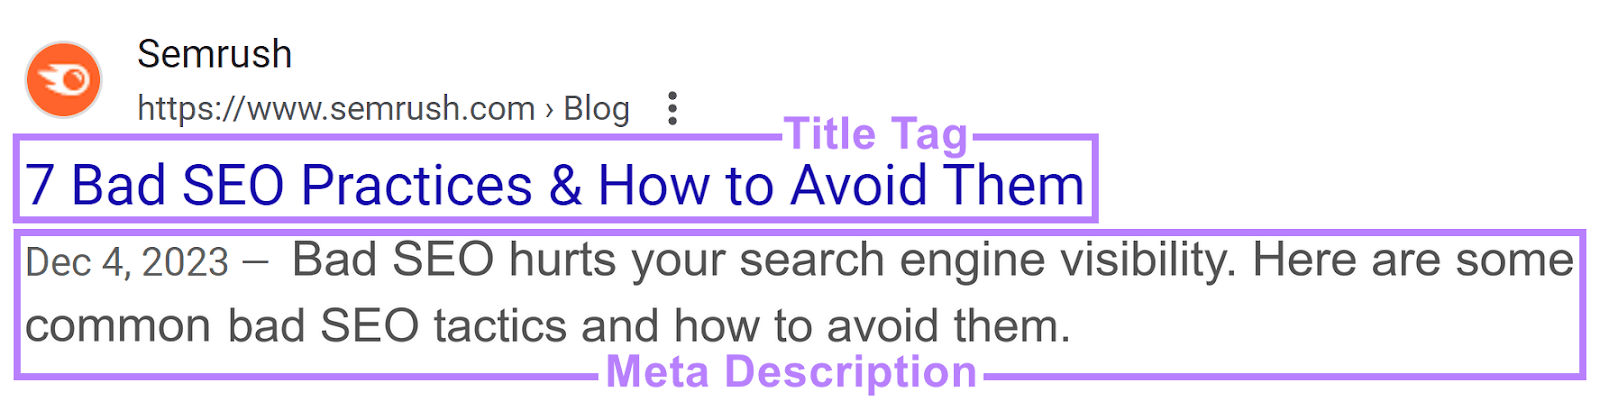 title tag and meta description shown as blue hyperlink in the SERP